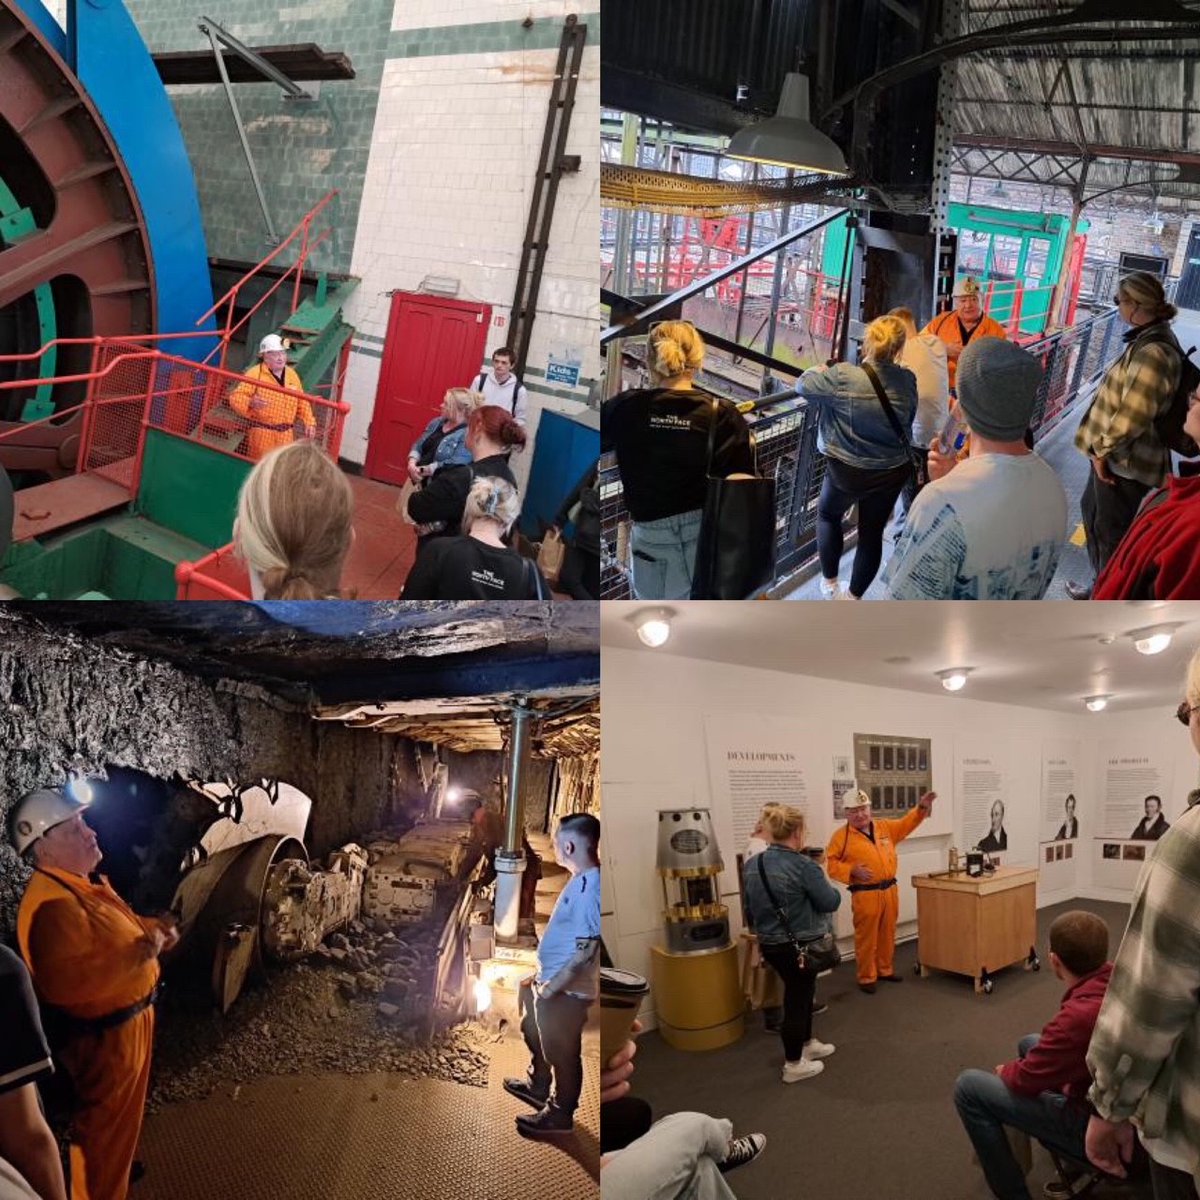 As part of their induction week our student visited @NatMiningMuseum and had a brilliant tour by Jim. Jim was once a student at Newbattle in the 80s and went on to study at the University of Edinburgh. Great to share these stories with our students. ✨